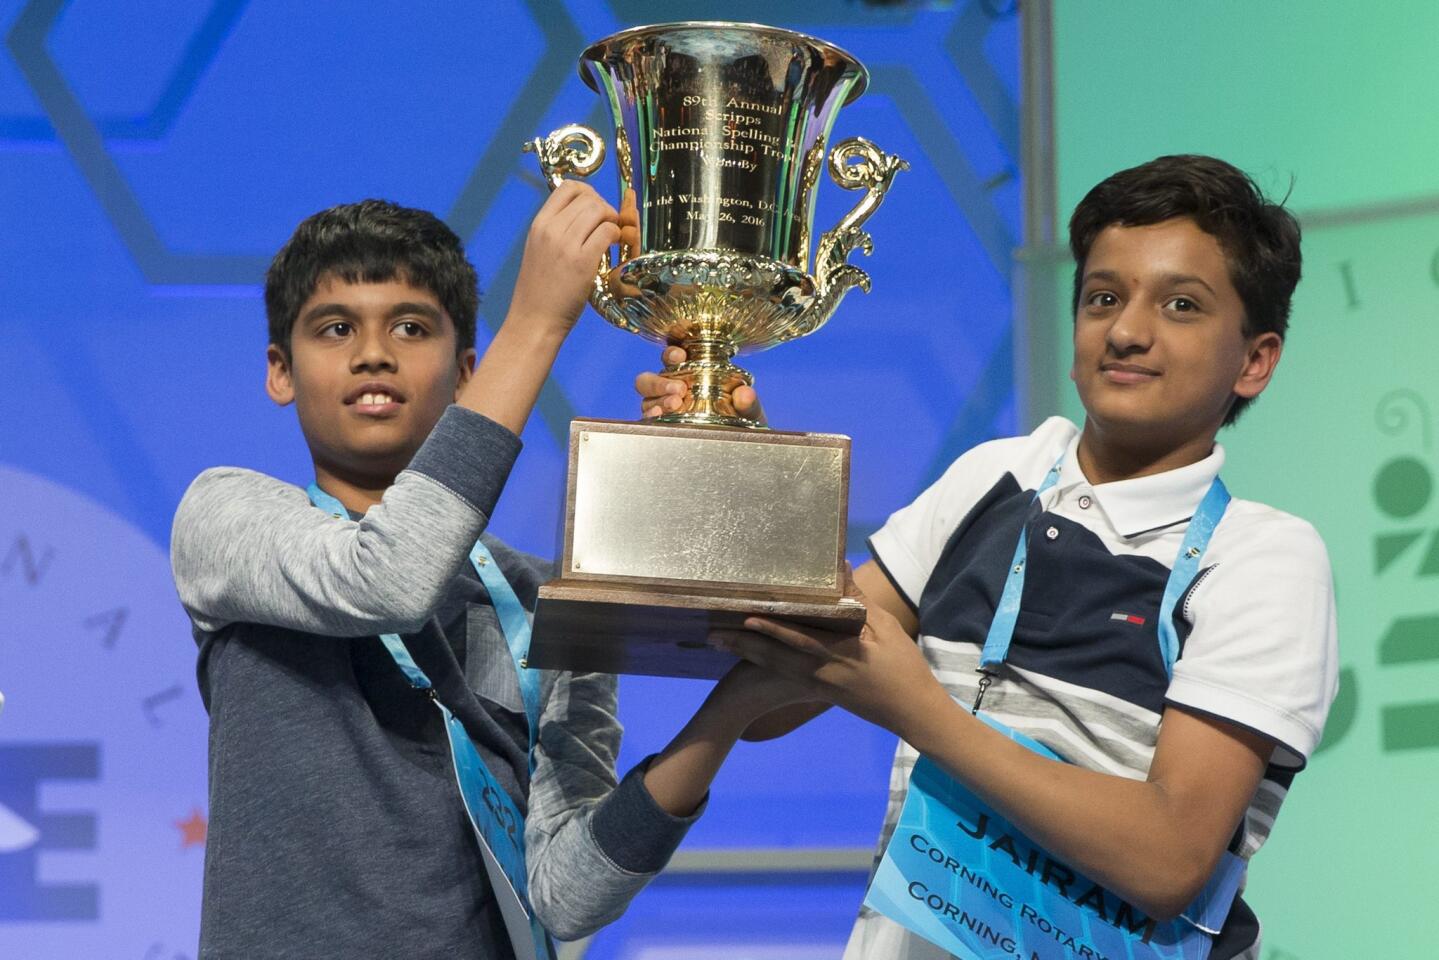 Nihar Saireddy Janga, left, of Austin, Texas, and Jairam Jagadeesh Hathwar, of Corning, N.Y., hoist the trophy after being declared co-champions at the 2016 Scripps National Spelling Bee in National Harbor, Md., on May 26, 2016.